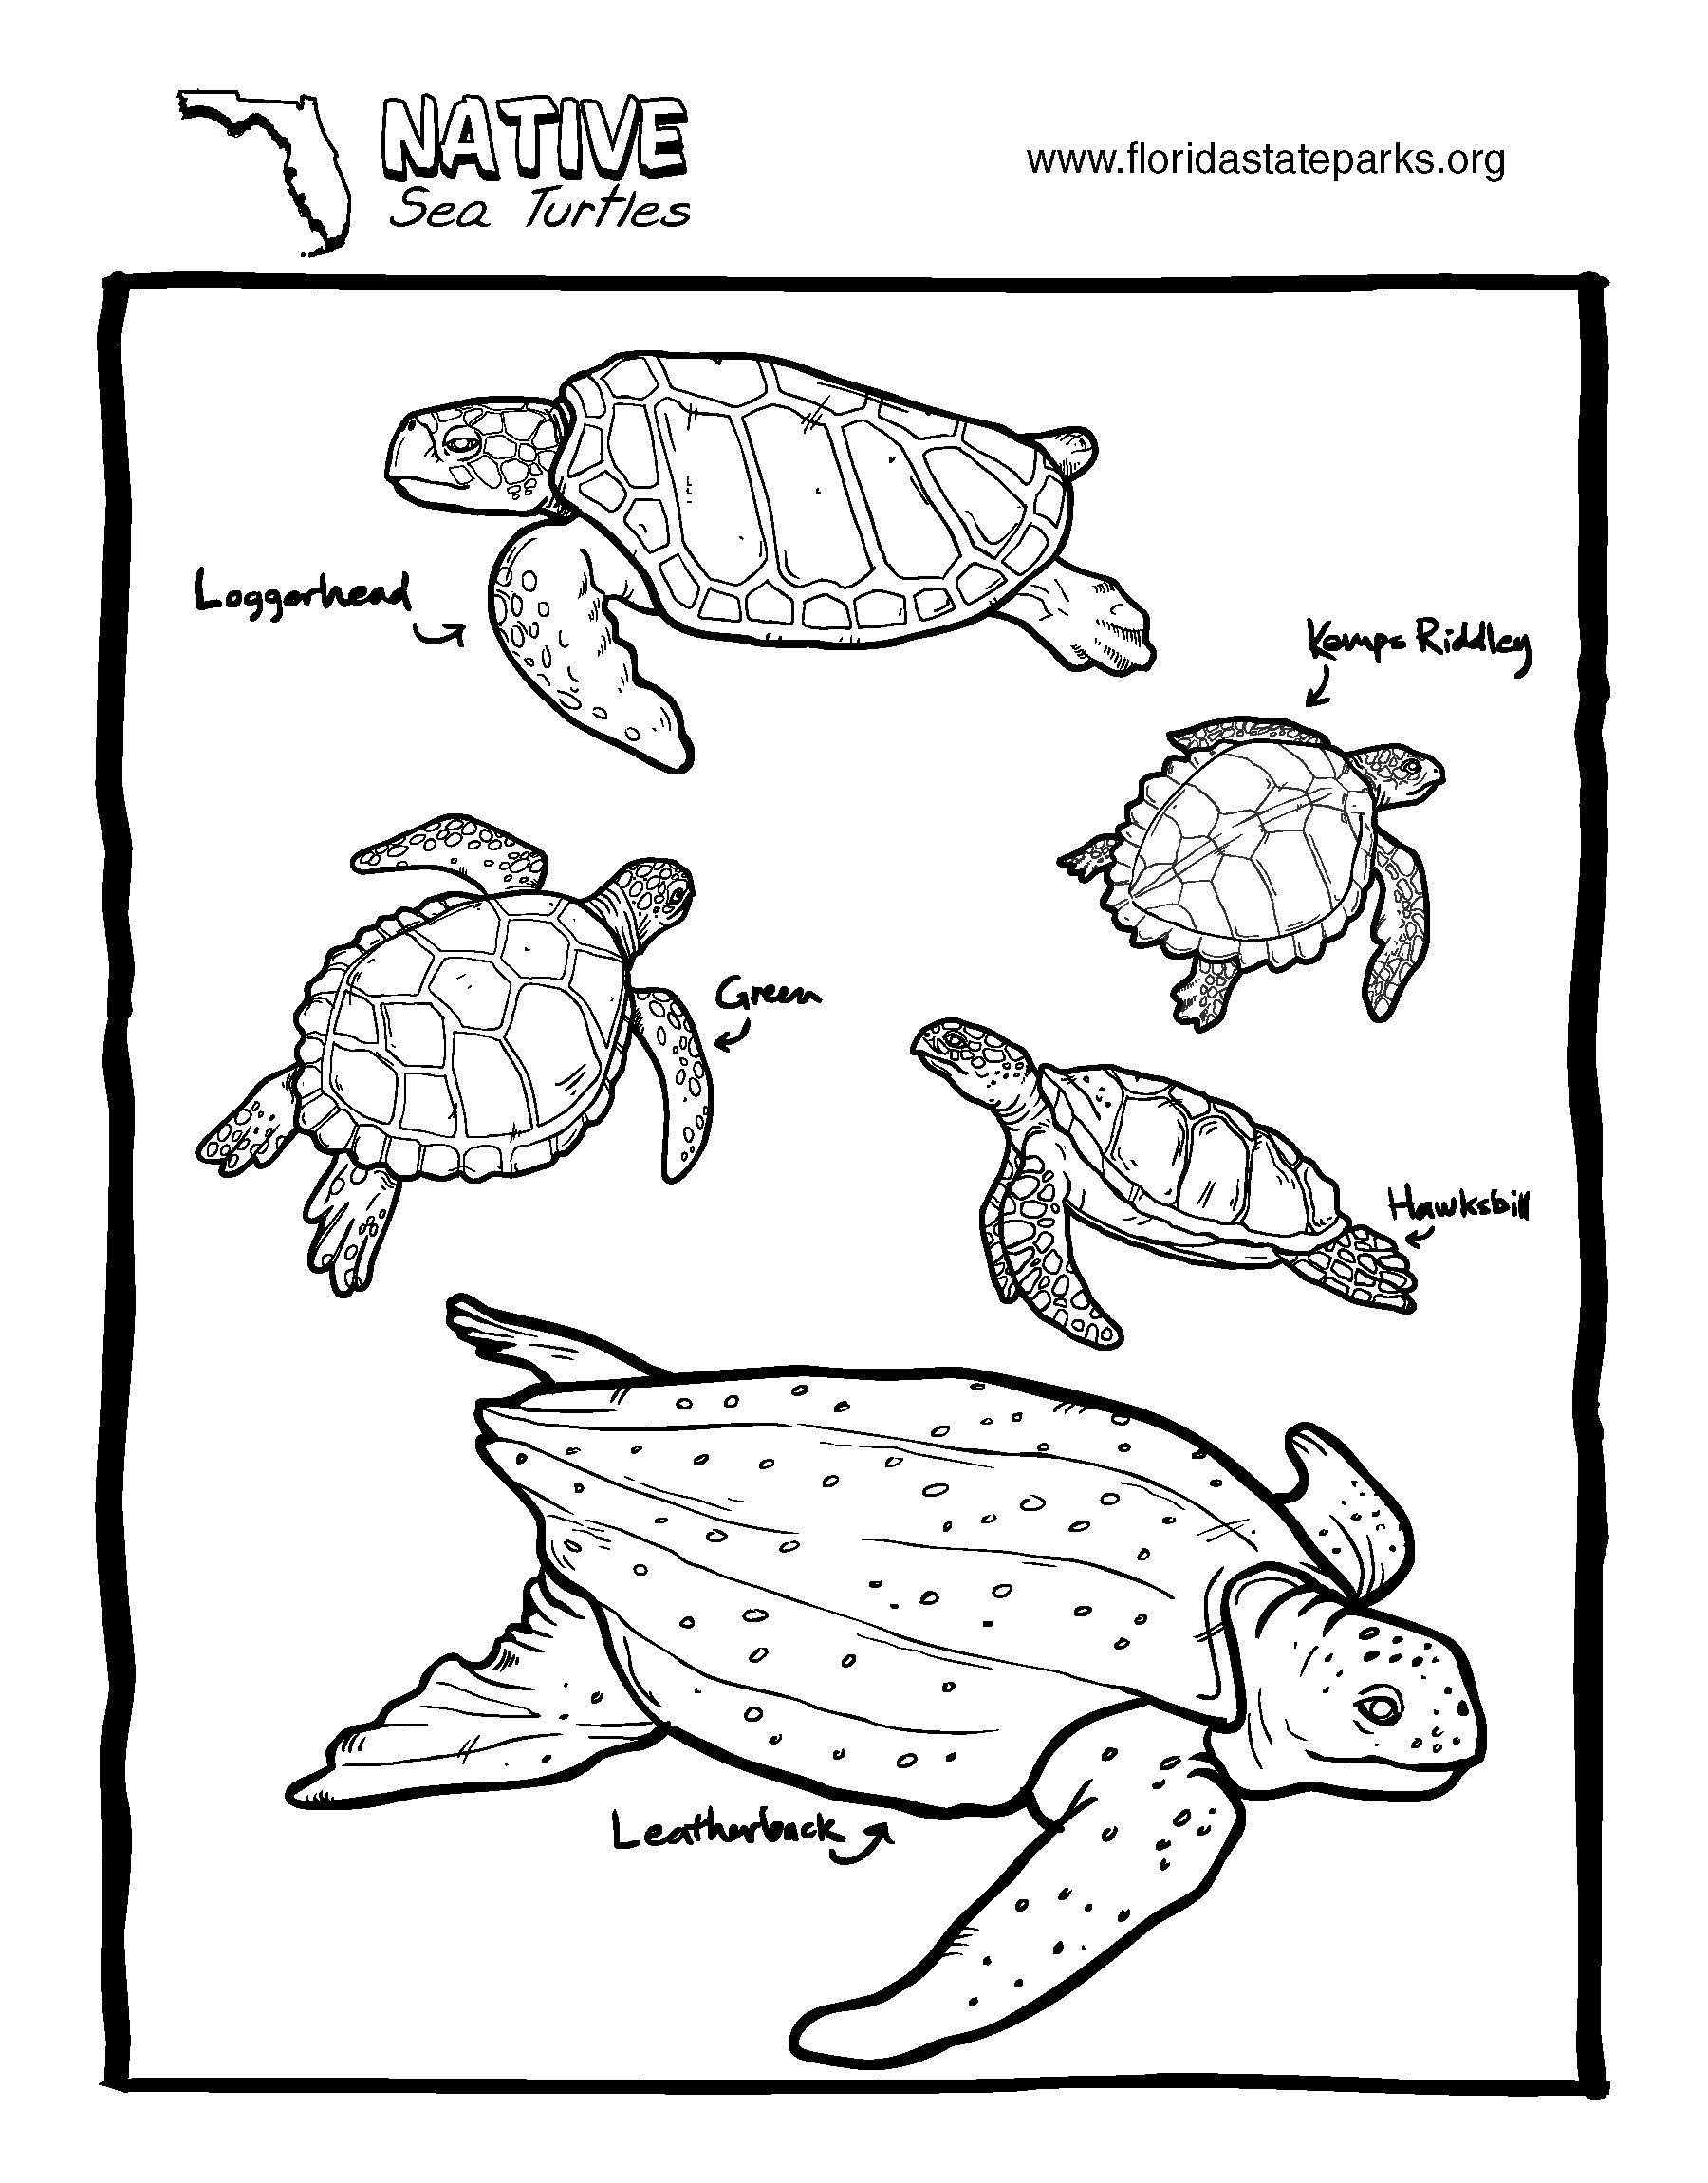 A coloring sheet featuring different kinds of sea turtles.